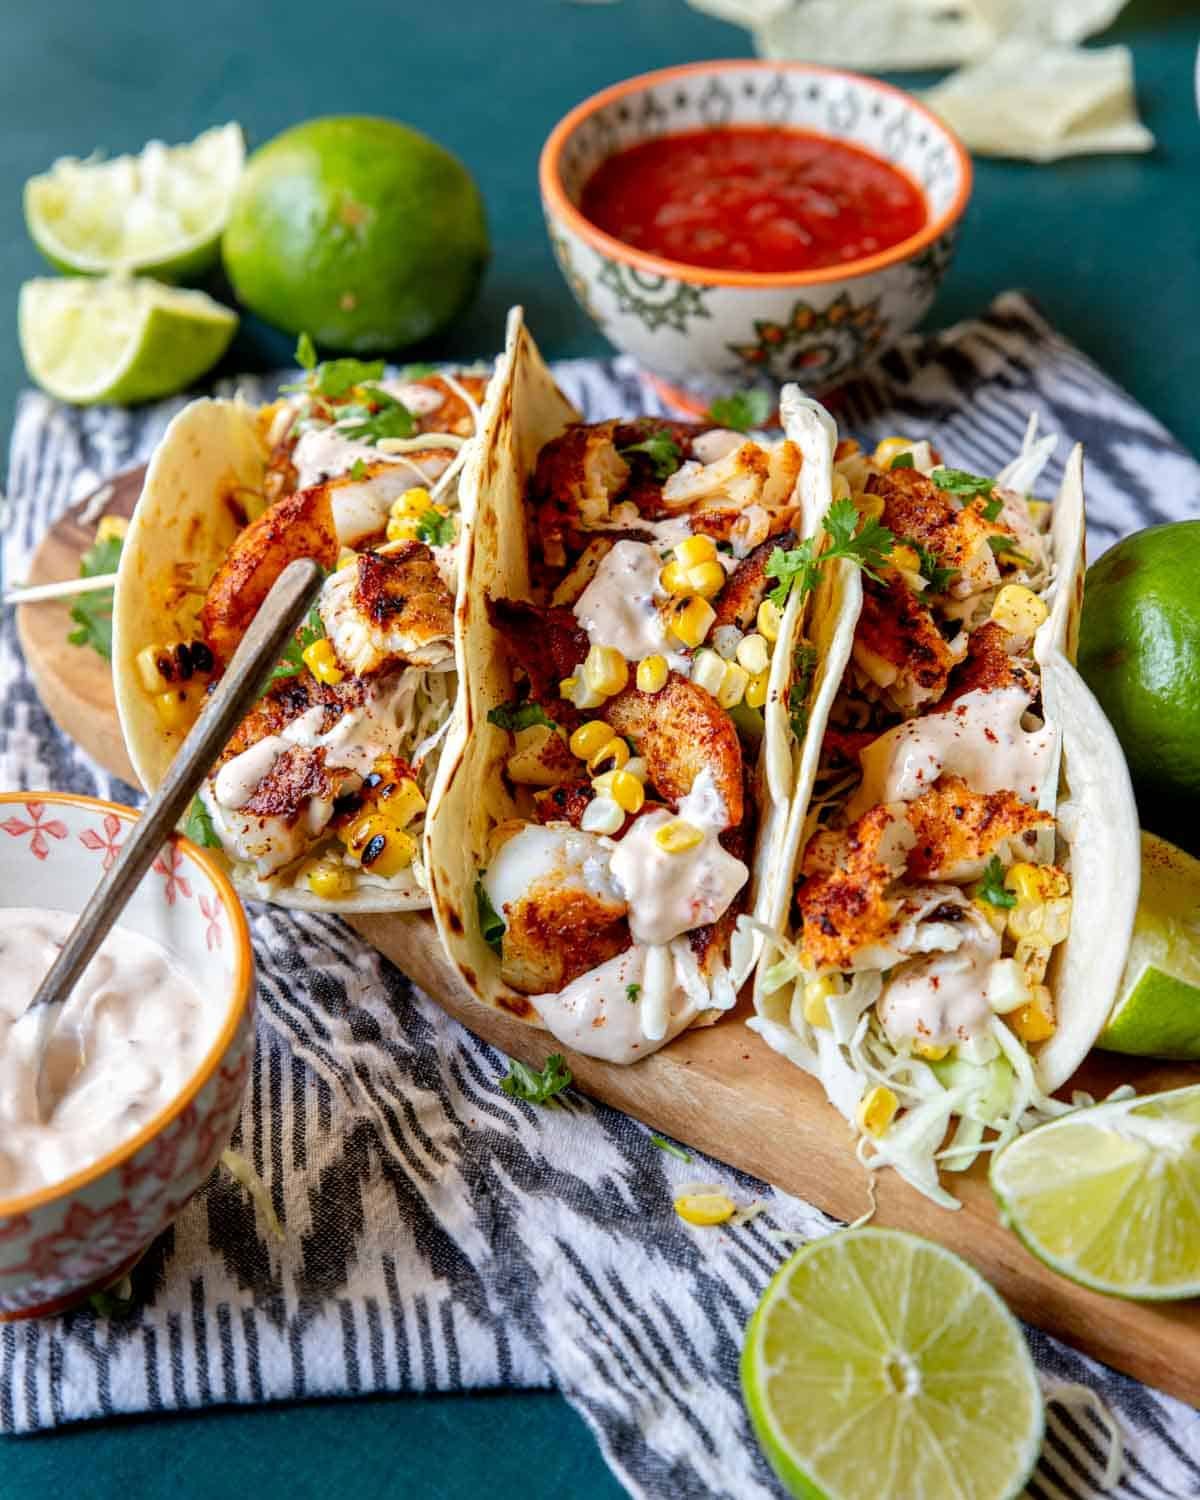 Three Tilapia fish tacos topped with chipotle crema